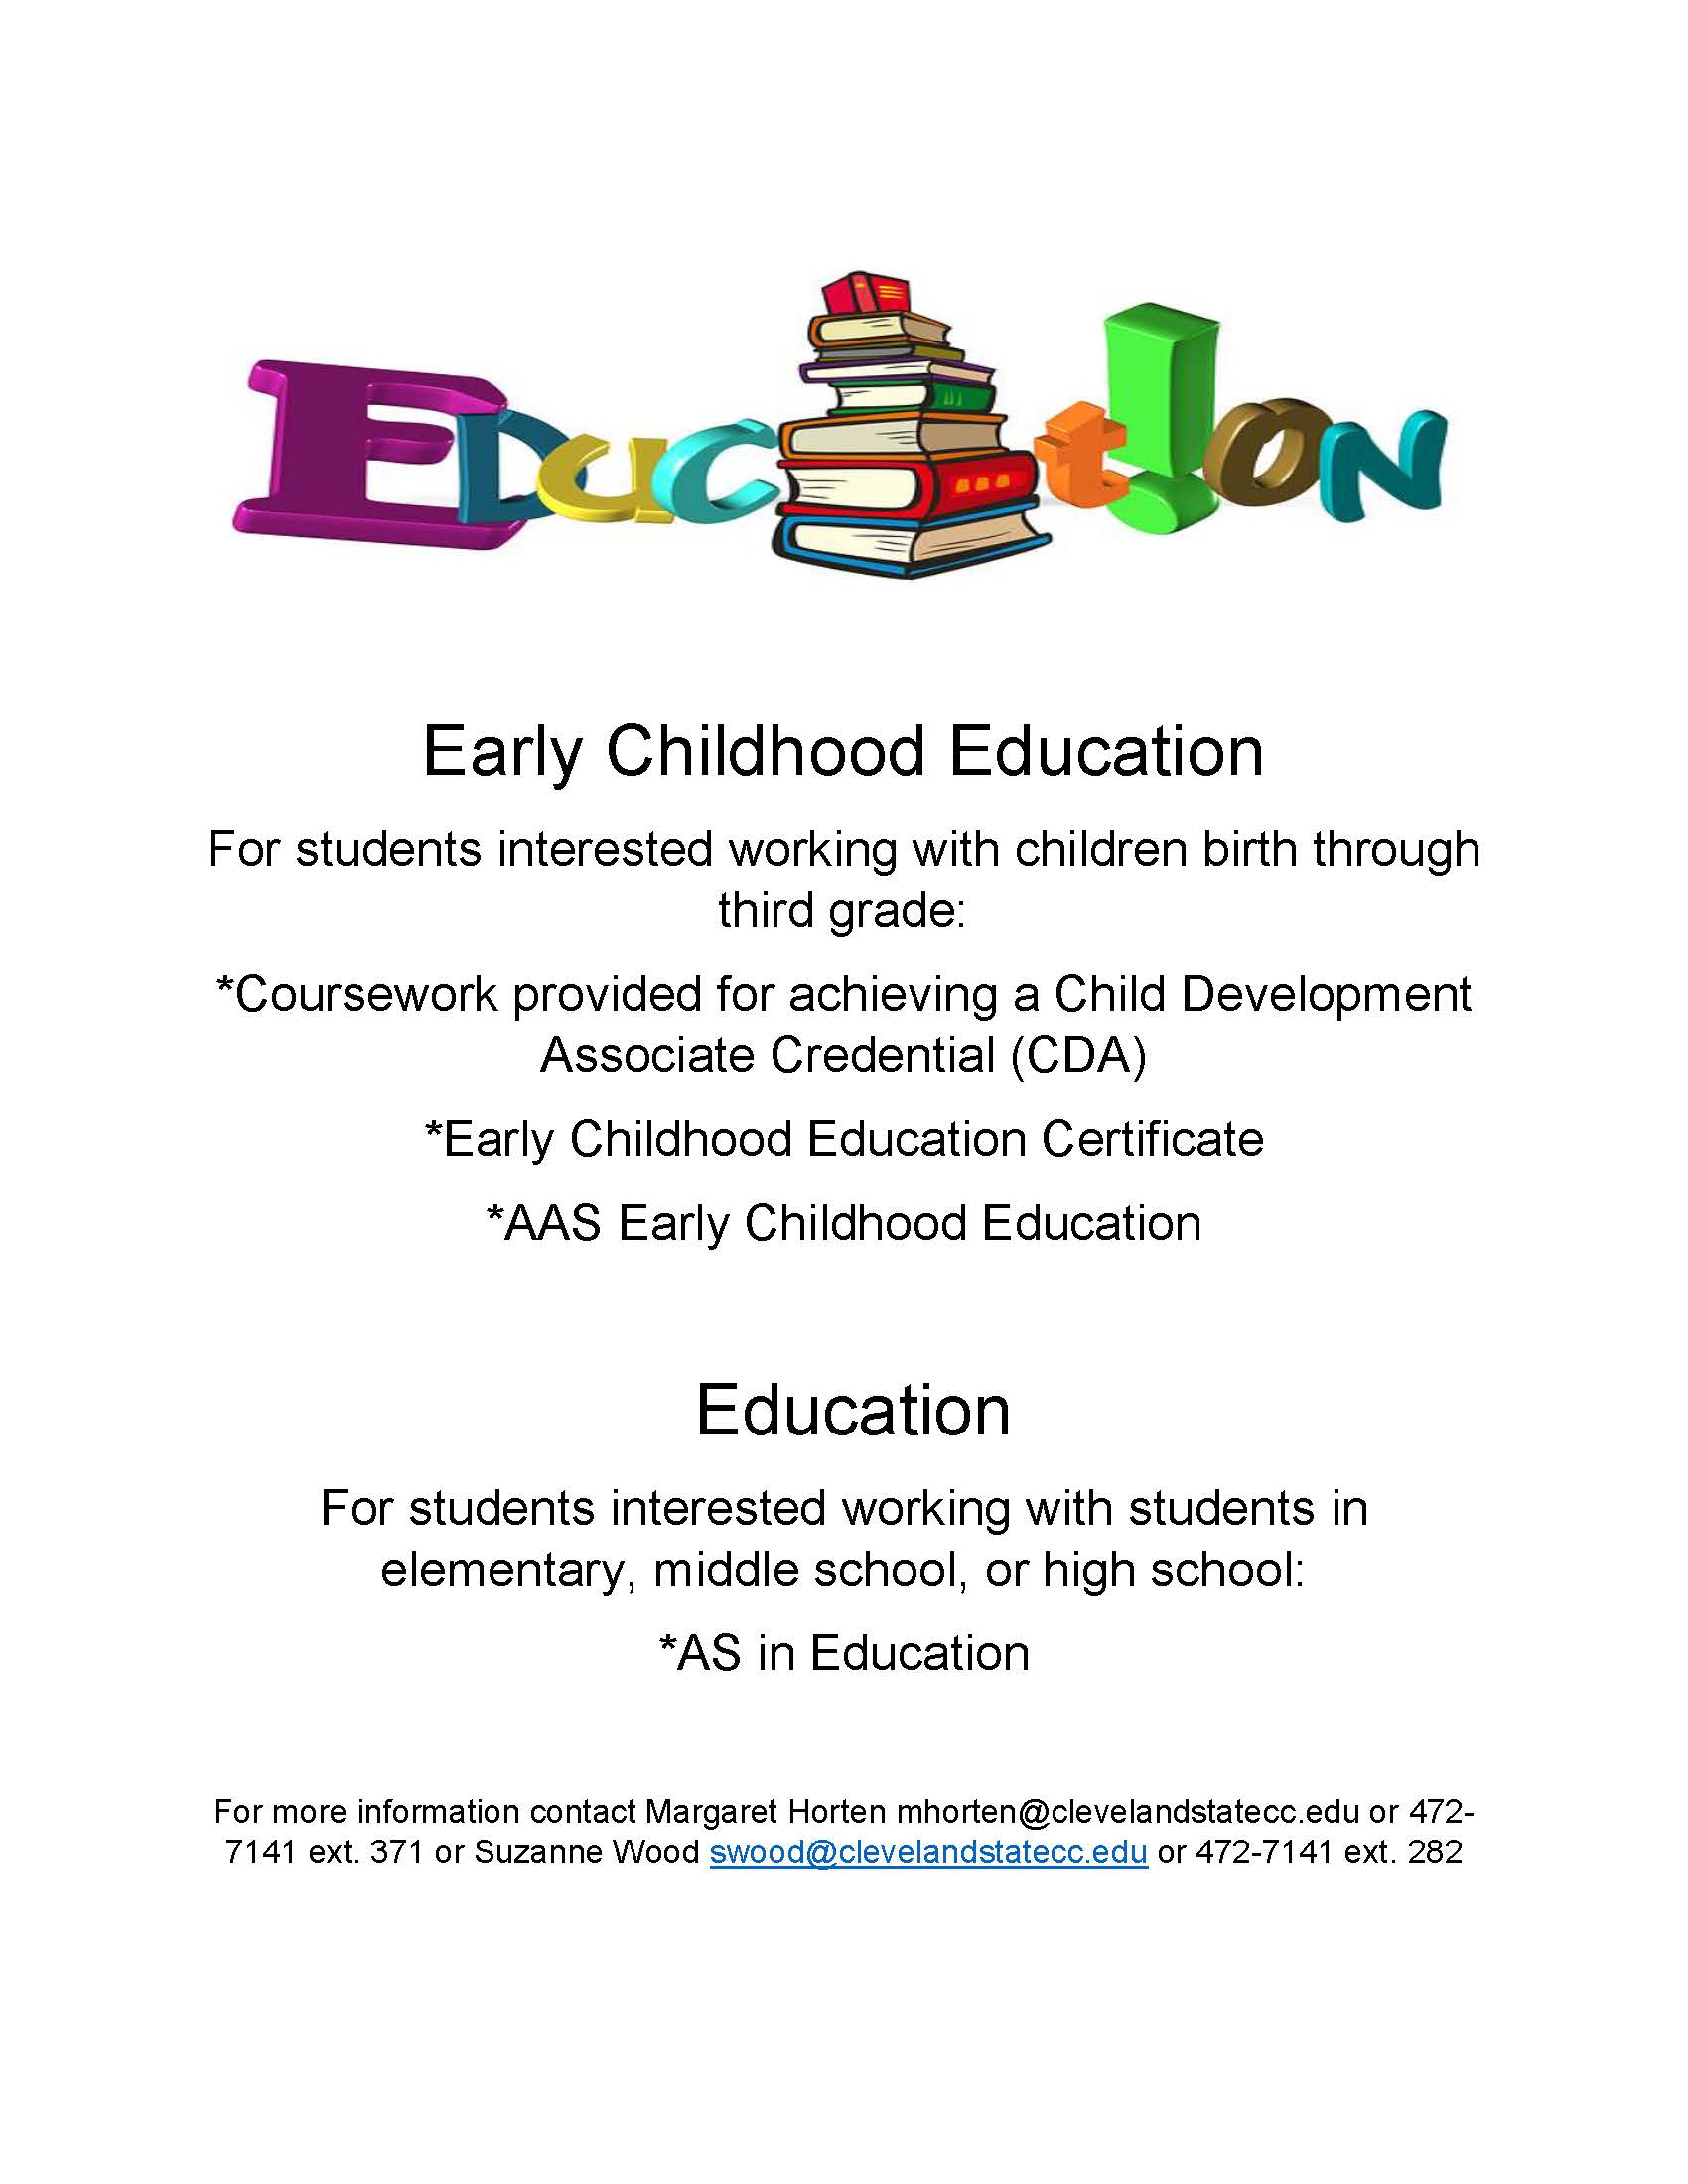 Education Department Flier. PDF Version available at link above.